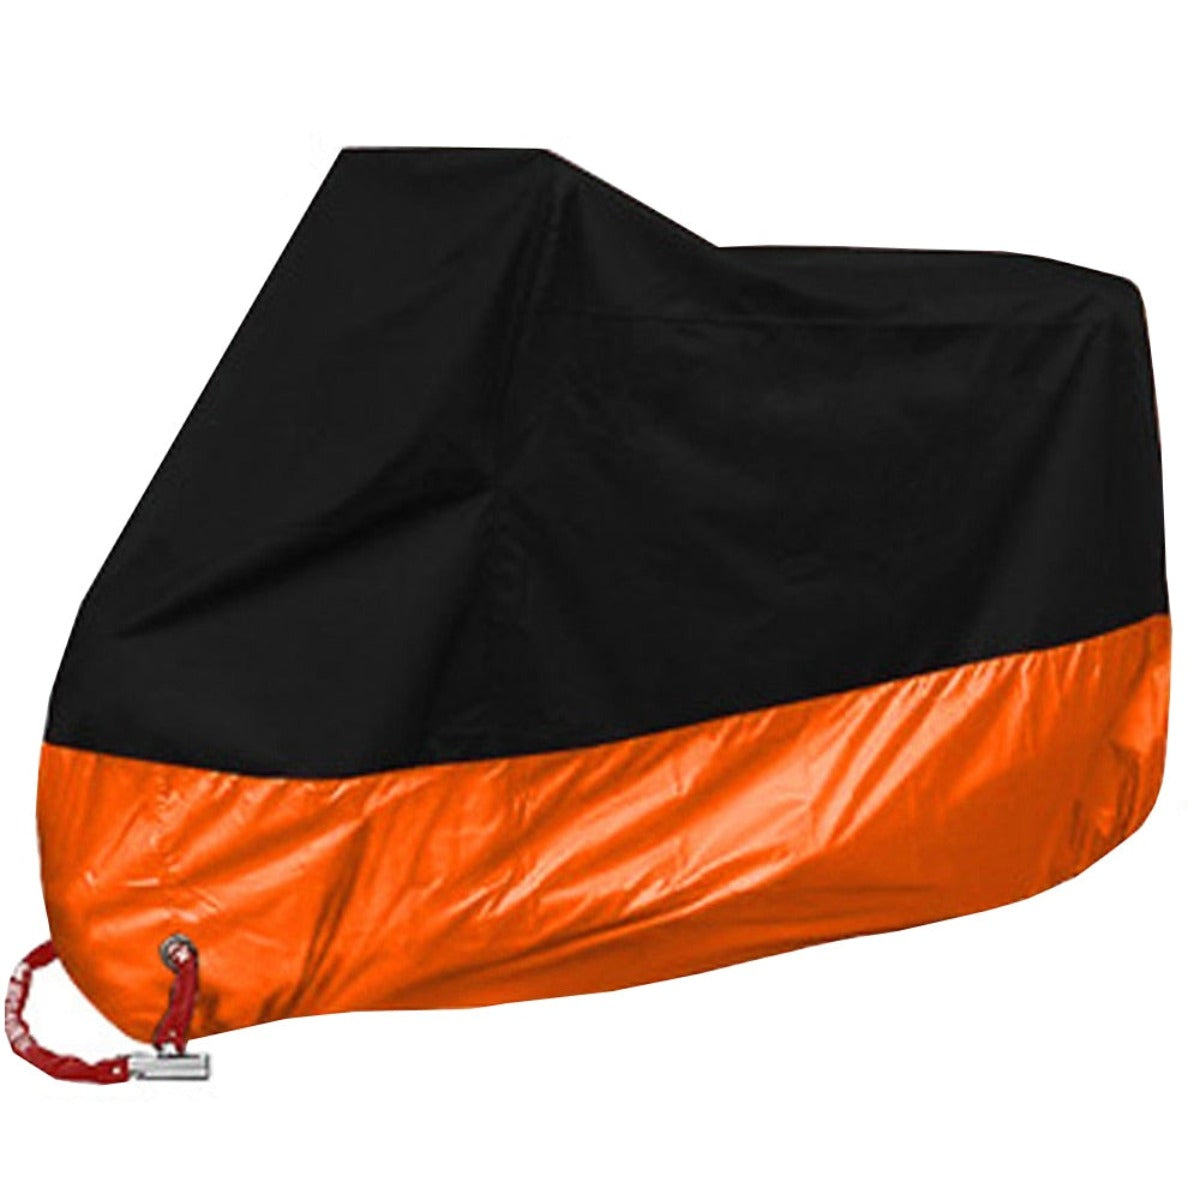 Harley-Davidson motorbike protected from weather damage with a Waterproof Protective Motorcycle Cover.